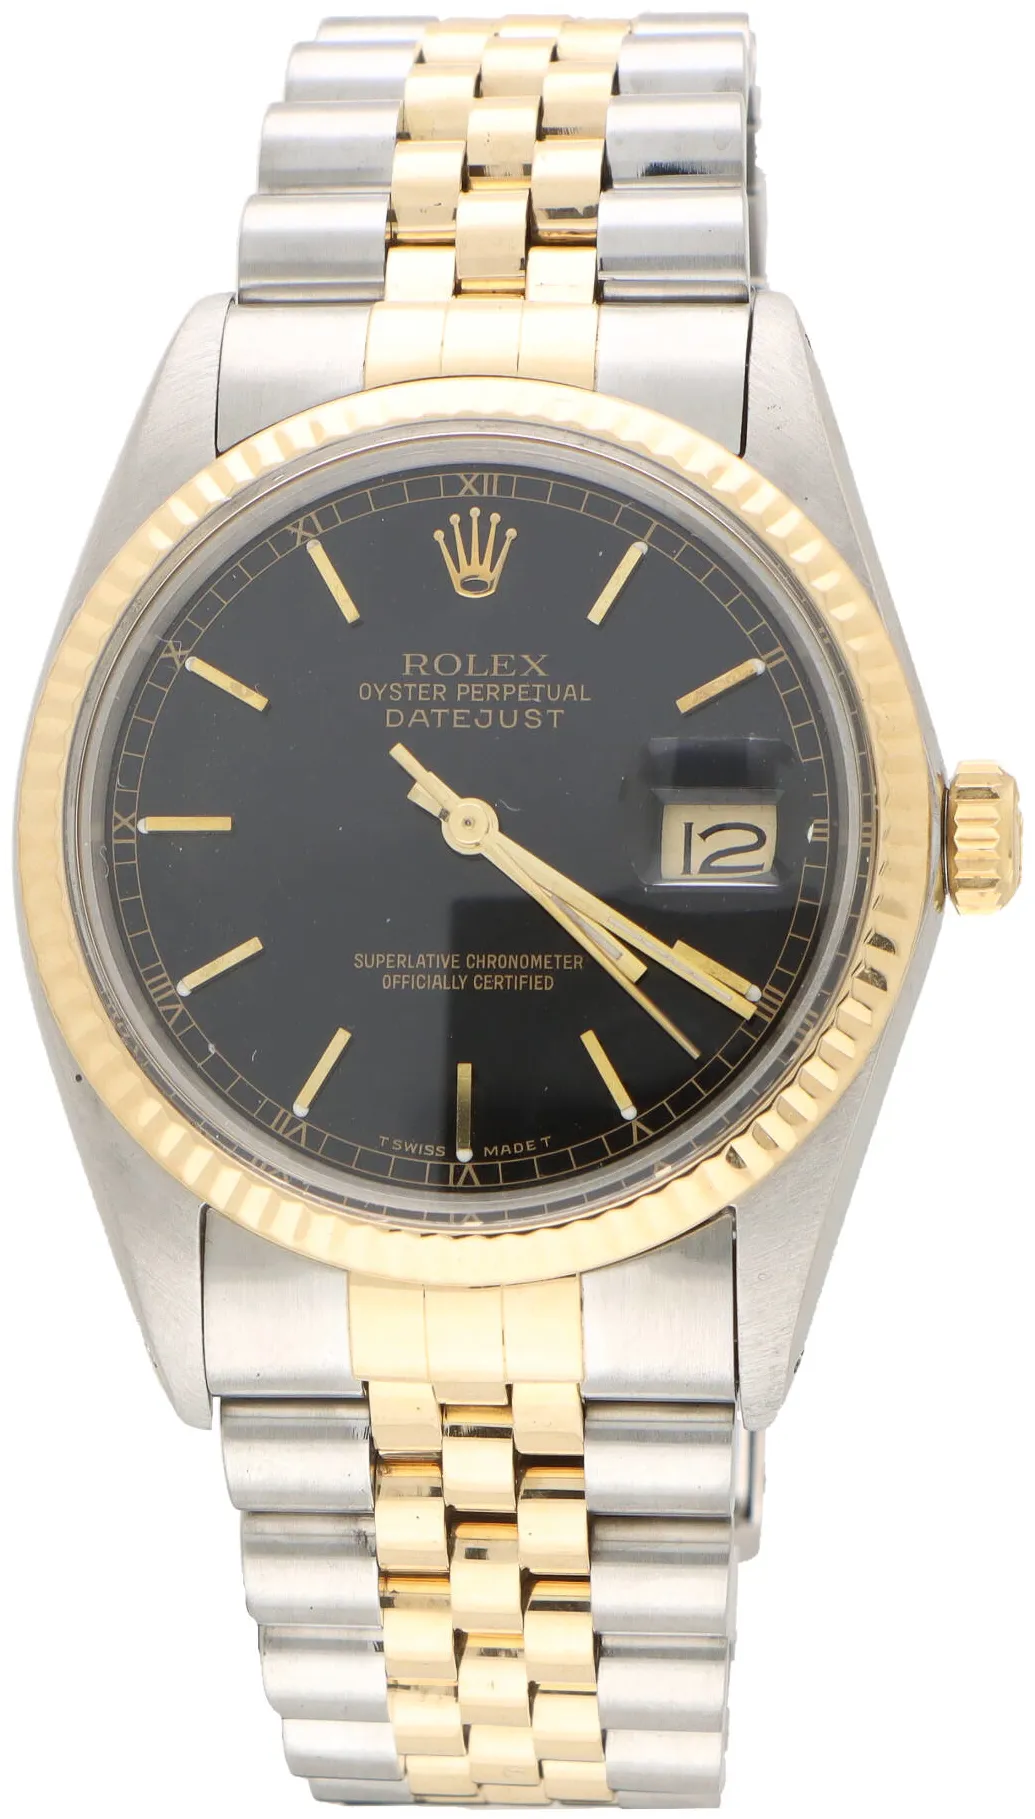 Rolex Oyster Perpetual "Datejust" 16013 36mm Yellow gold and stainless steel Black